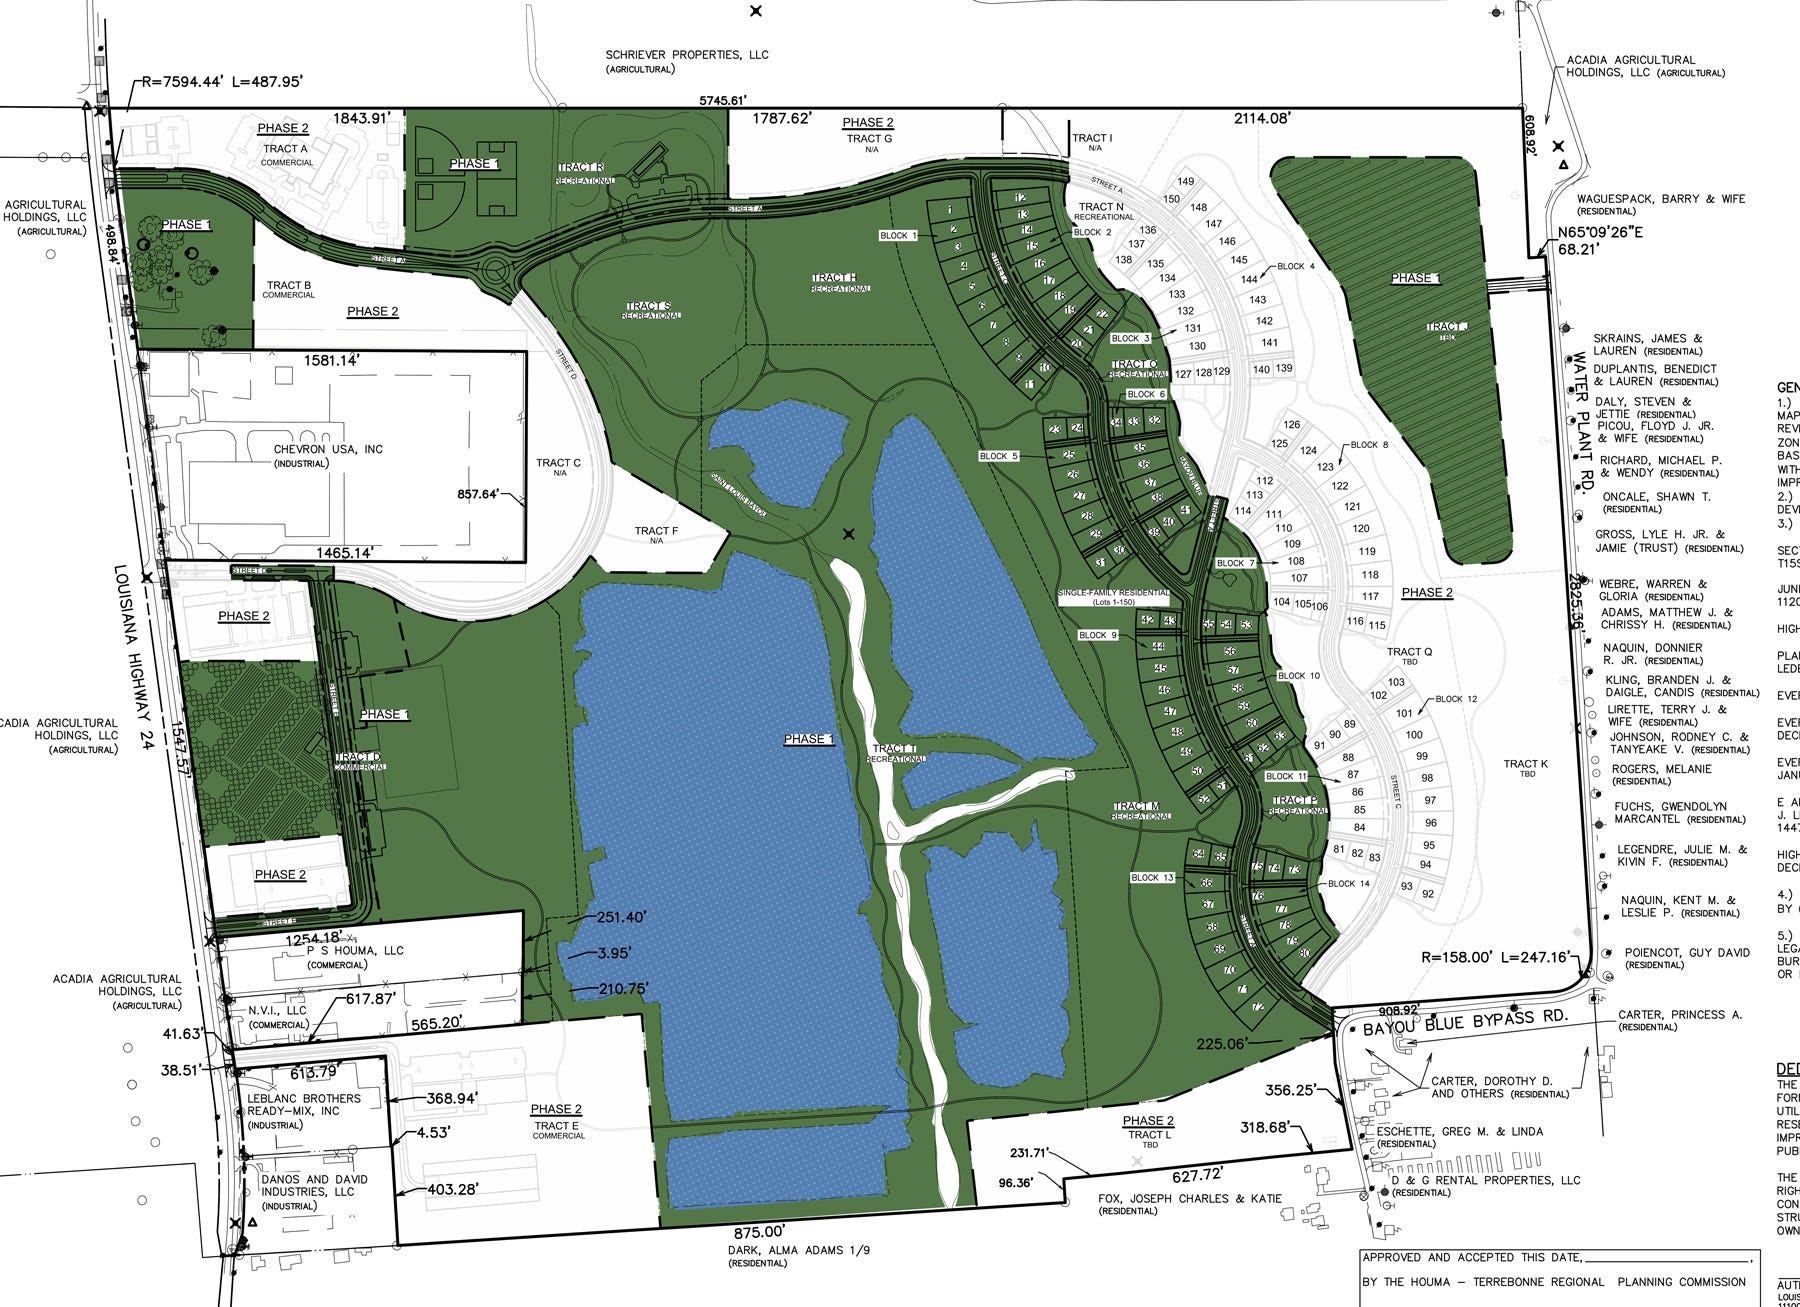 Rendering of the site plan for Isle de Jean Charles residents who move to resettlement community in Schriever, Louisiana.